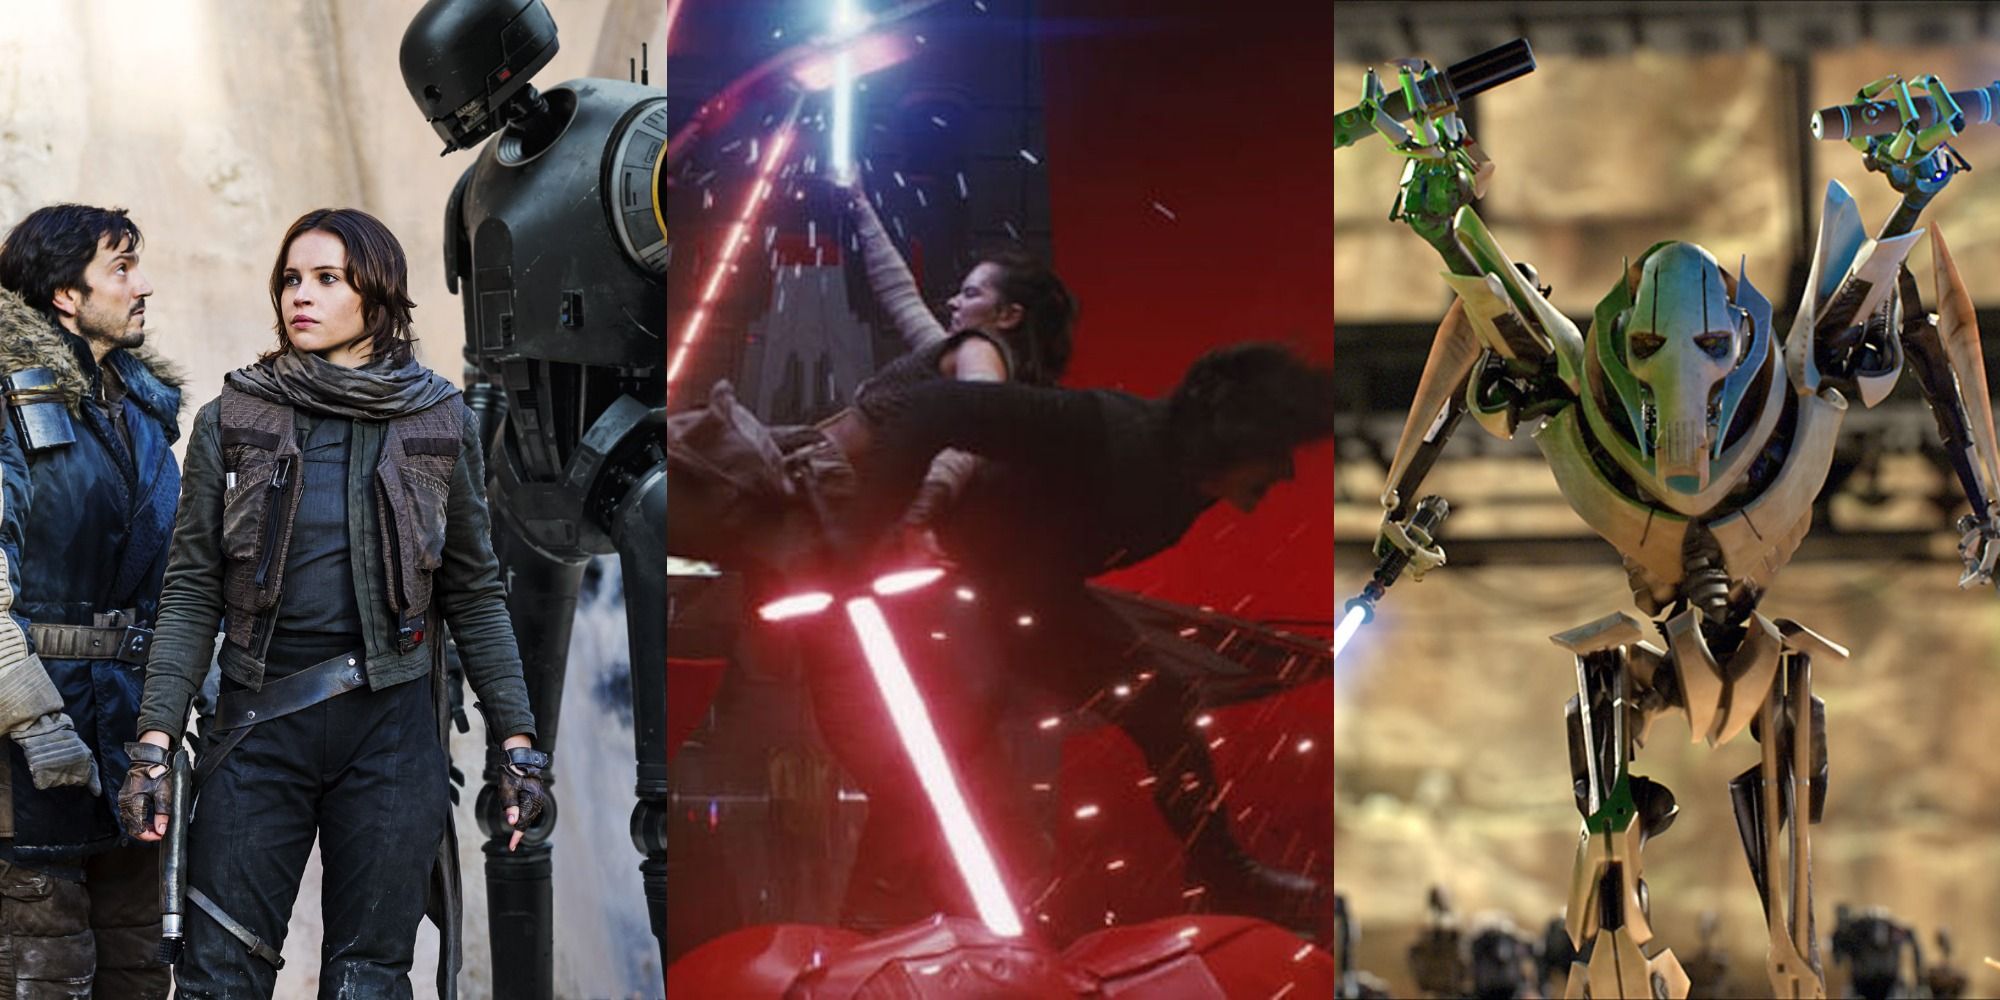 Split image of Andor, Jyn and K-2SO, Rey and Kylo fighting with lightsabers, General Grevious attacking